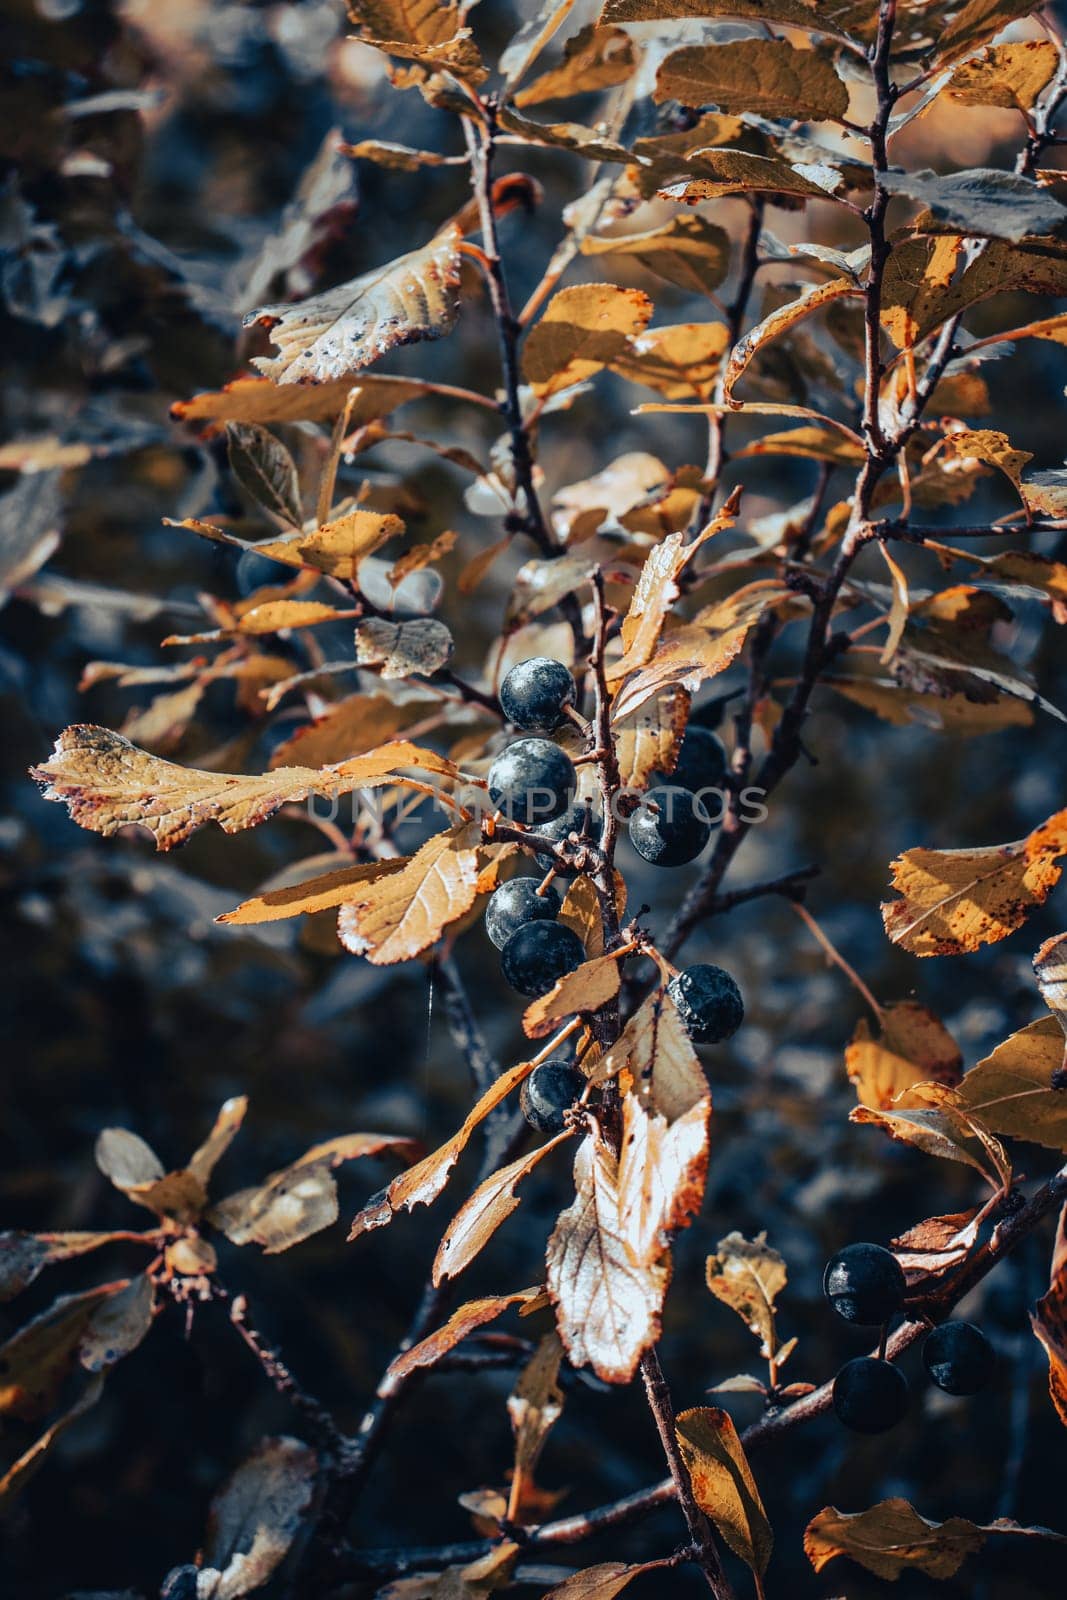 Blackthorn yellow branch leaves with berries concept photo by _Nataly_Nati_